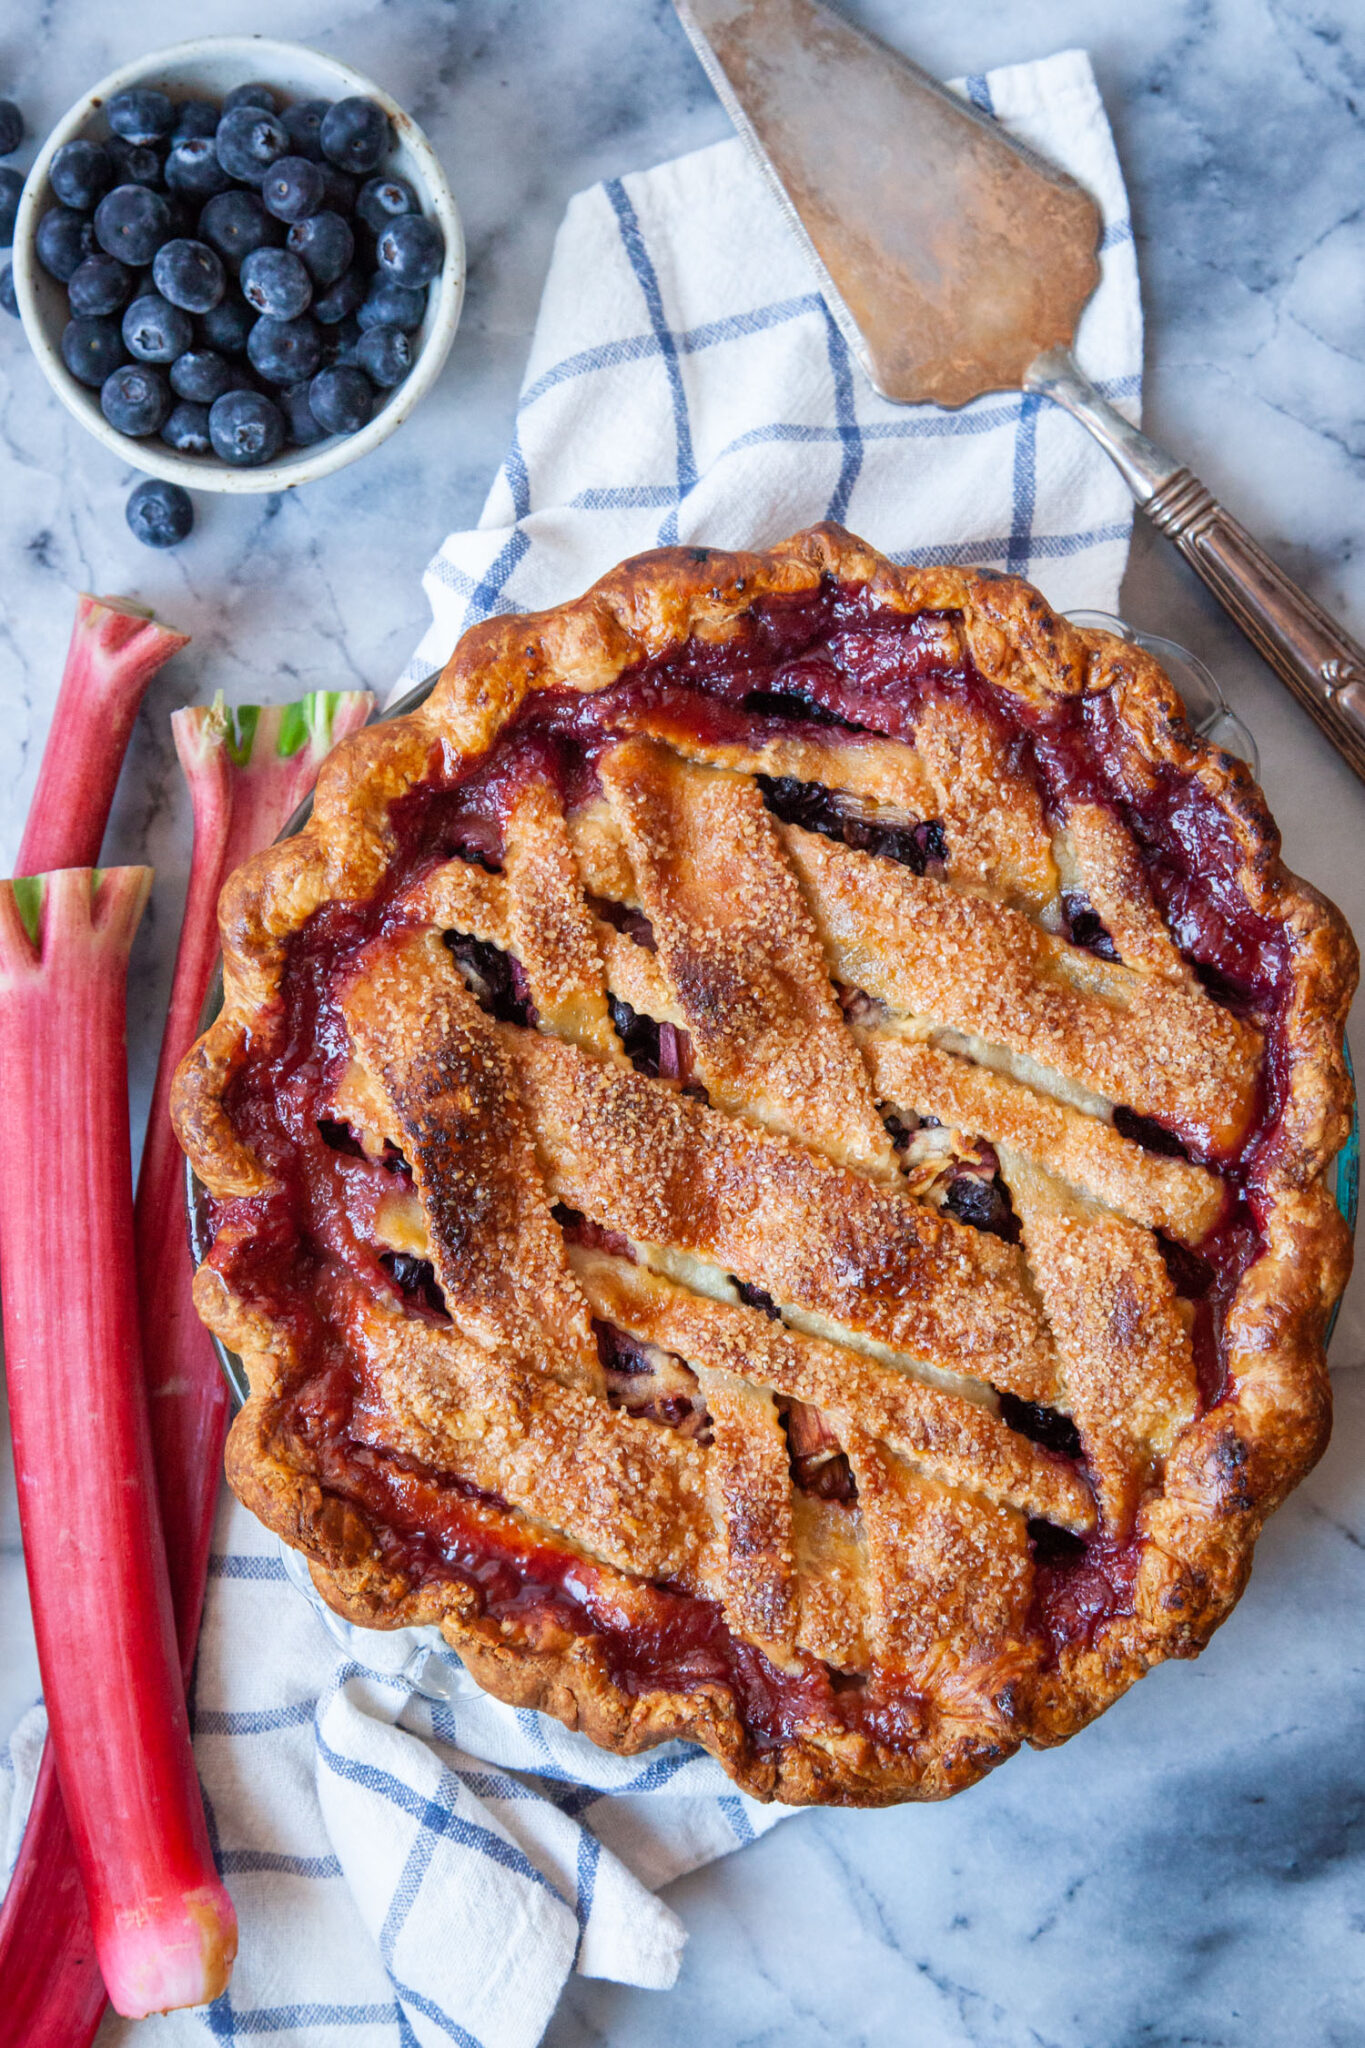 A blueberry rhubarb pie with rhubarb and a small bowl of blueberries next to it, along with a silver pie server.